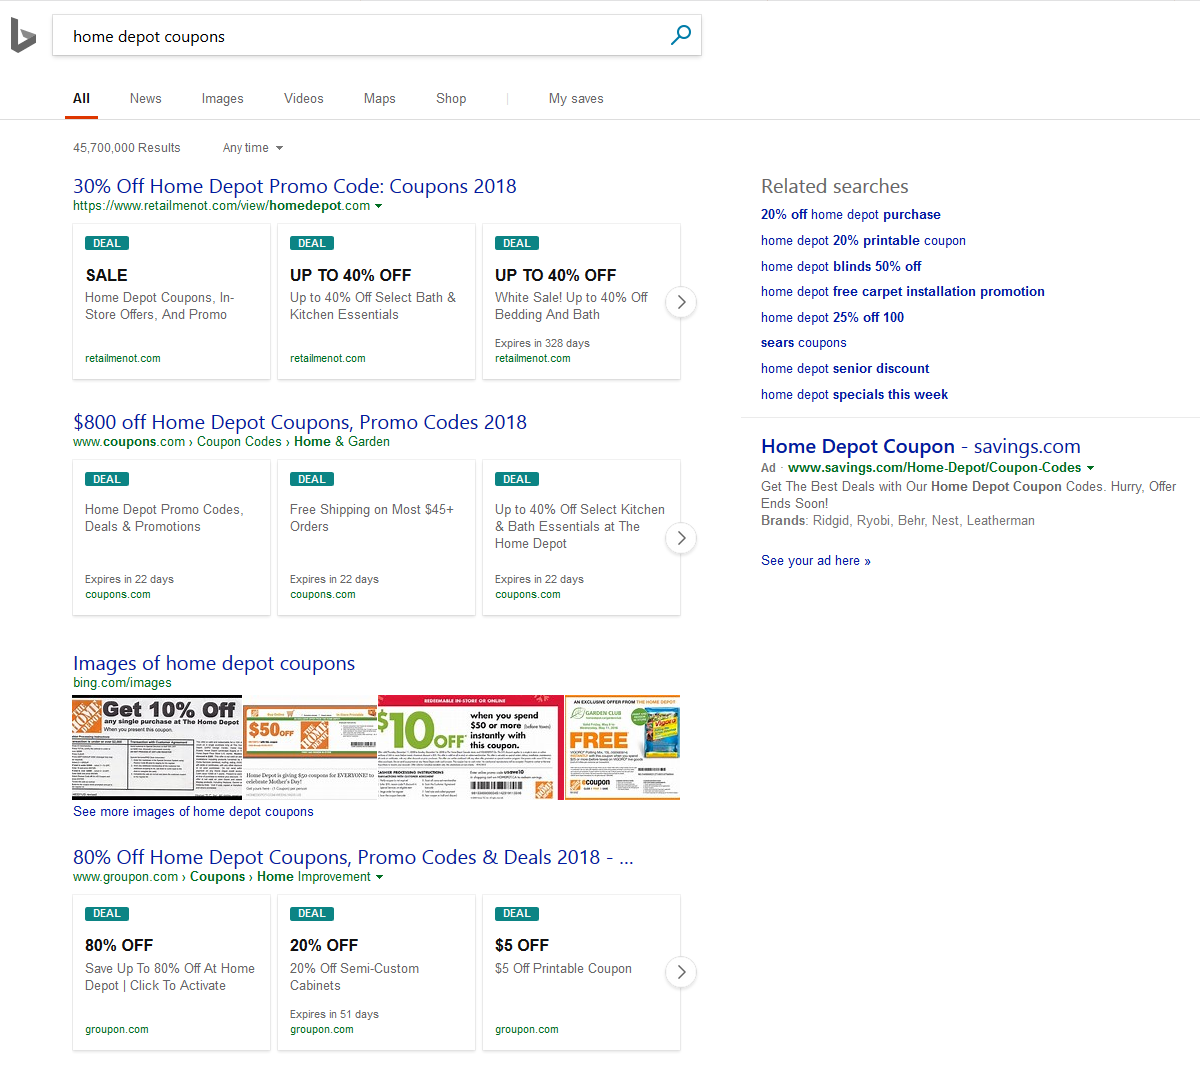 Bing Adds Coupon Carousels To Search Results For Retailers